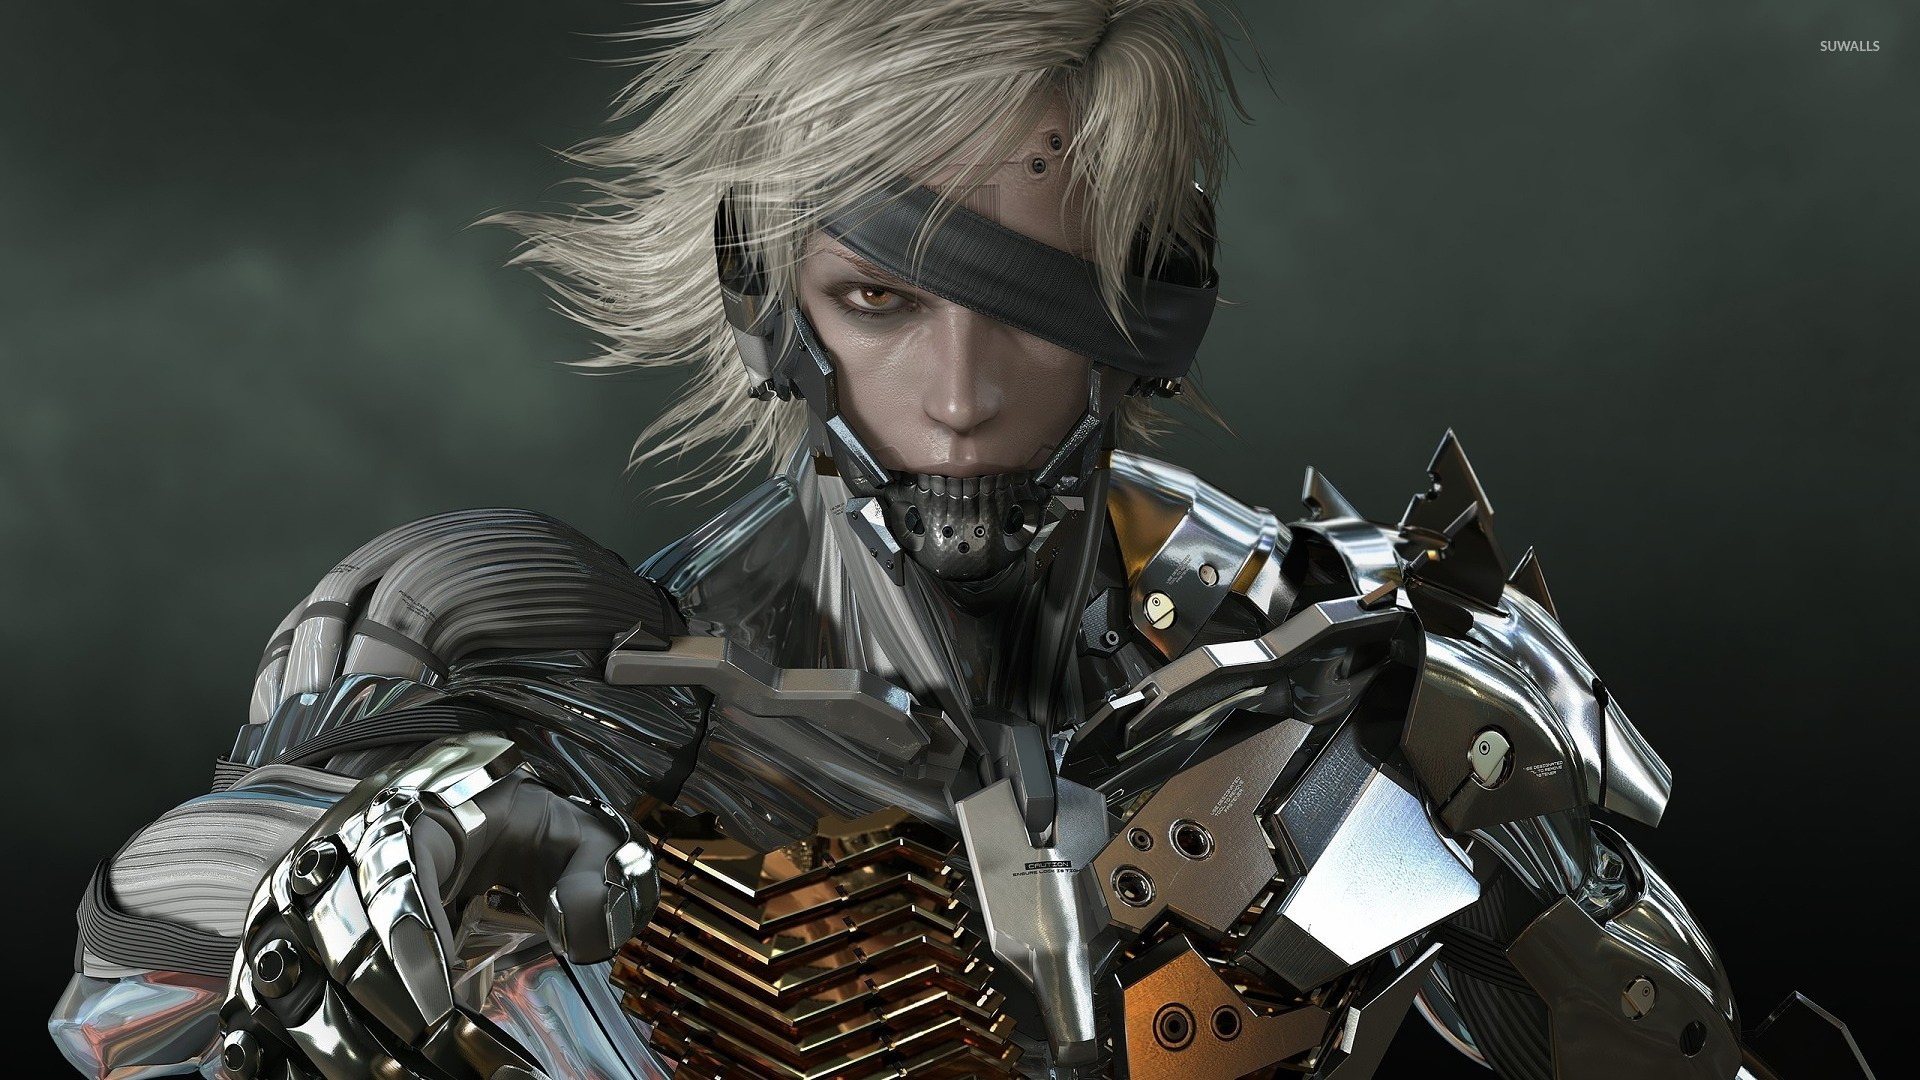 Raiden   Metal Gear Solid 2 Sons of Liberty wallpaper   Game